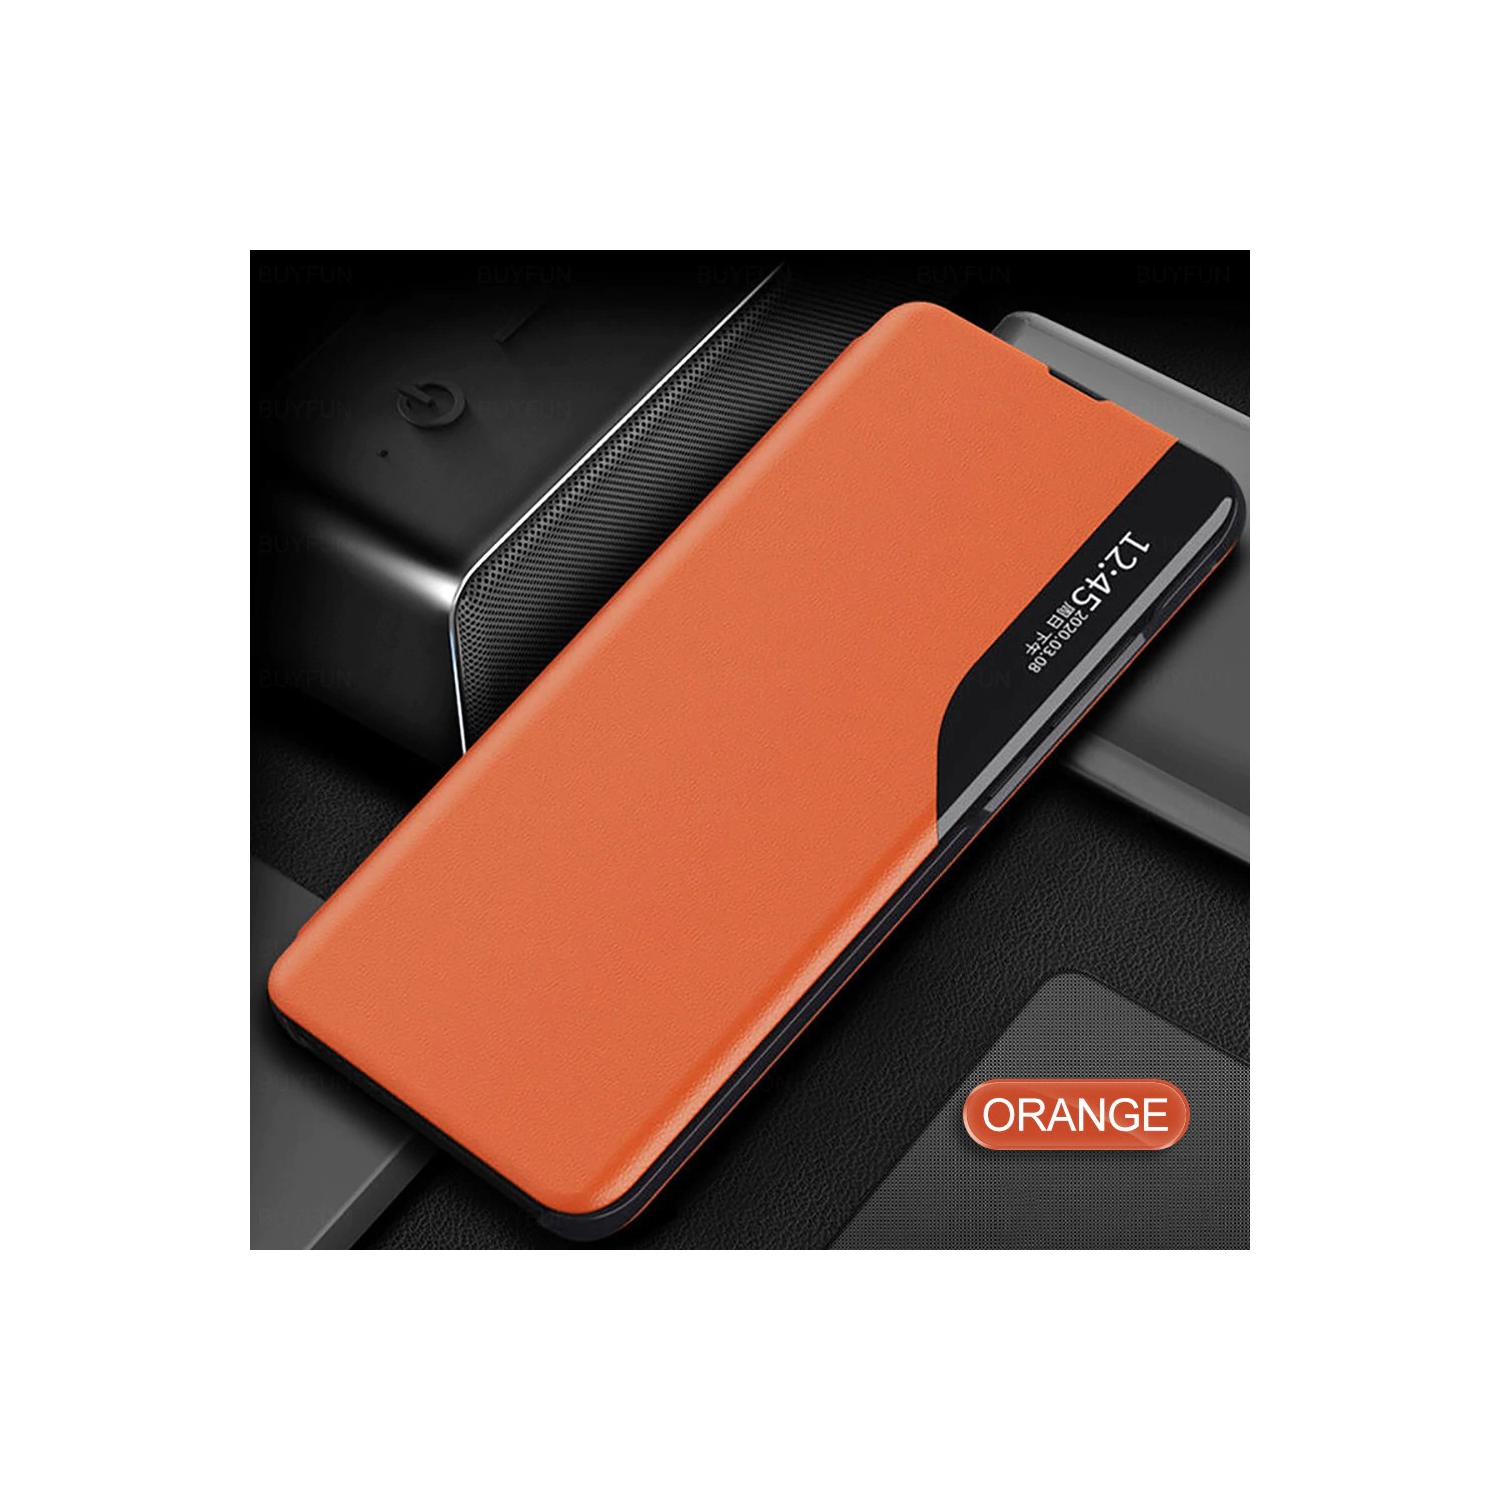 Smart Case window view leather Magnetic stand fundas phone cover Coque for Samsung Galaxy Note 20 Ultra (Orange)